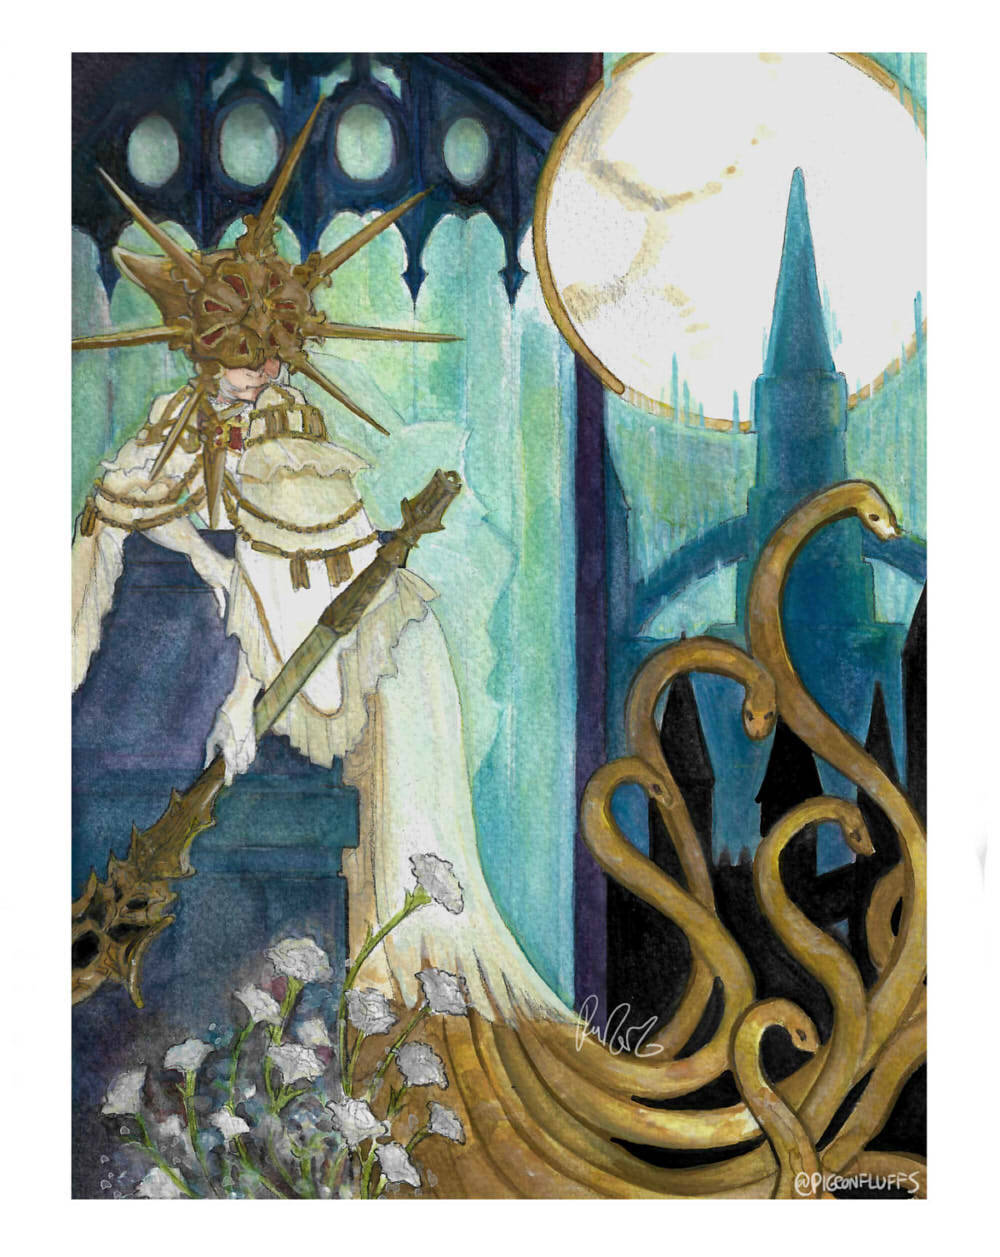 Gwyndolin of Anor Londo Painted with gouache and watercolor